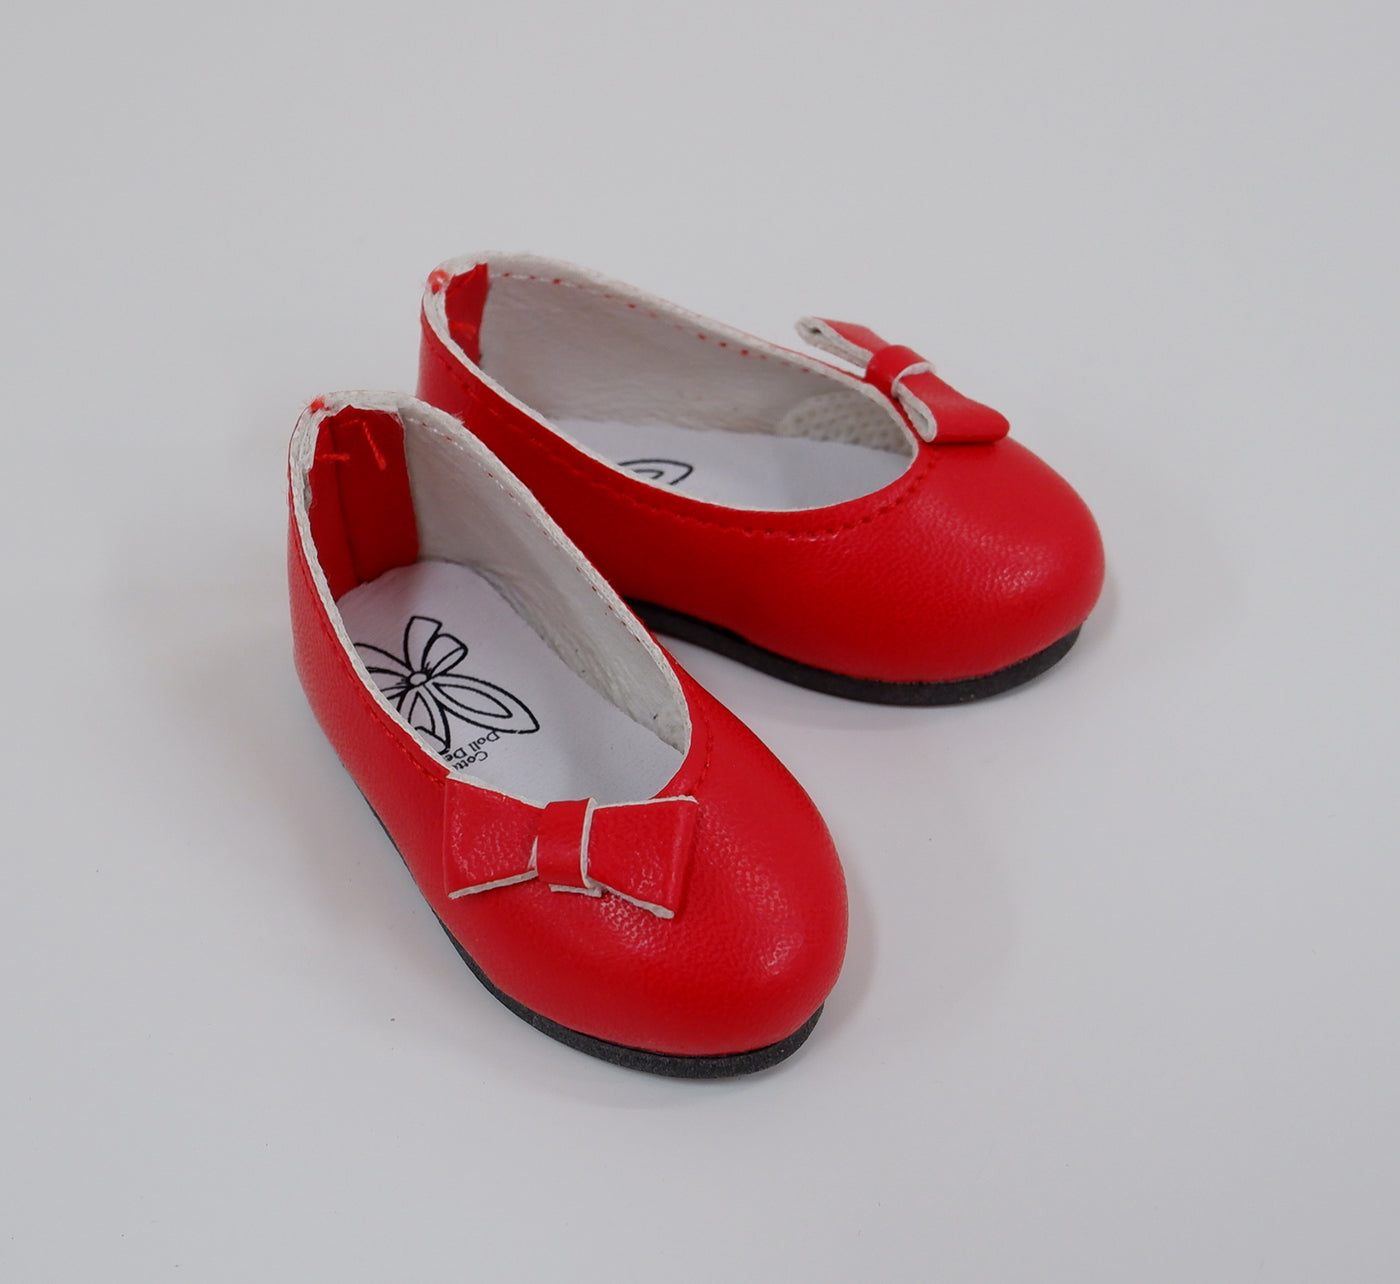 Bow Toe Ballet Flats - Cherry Red